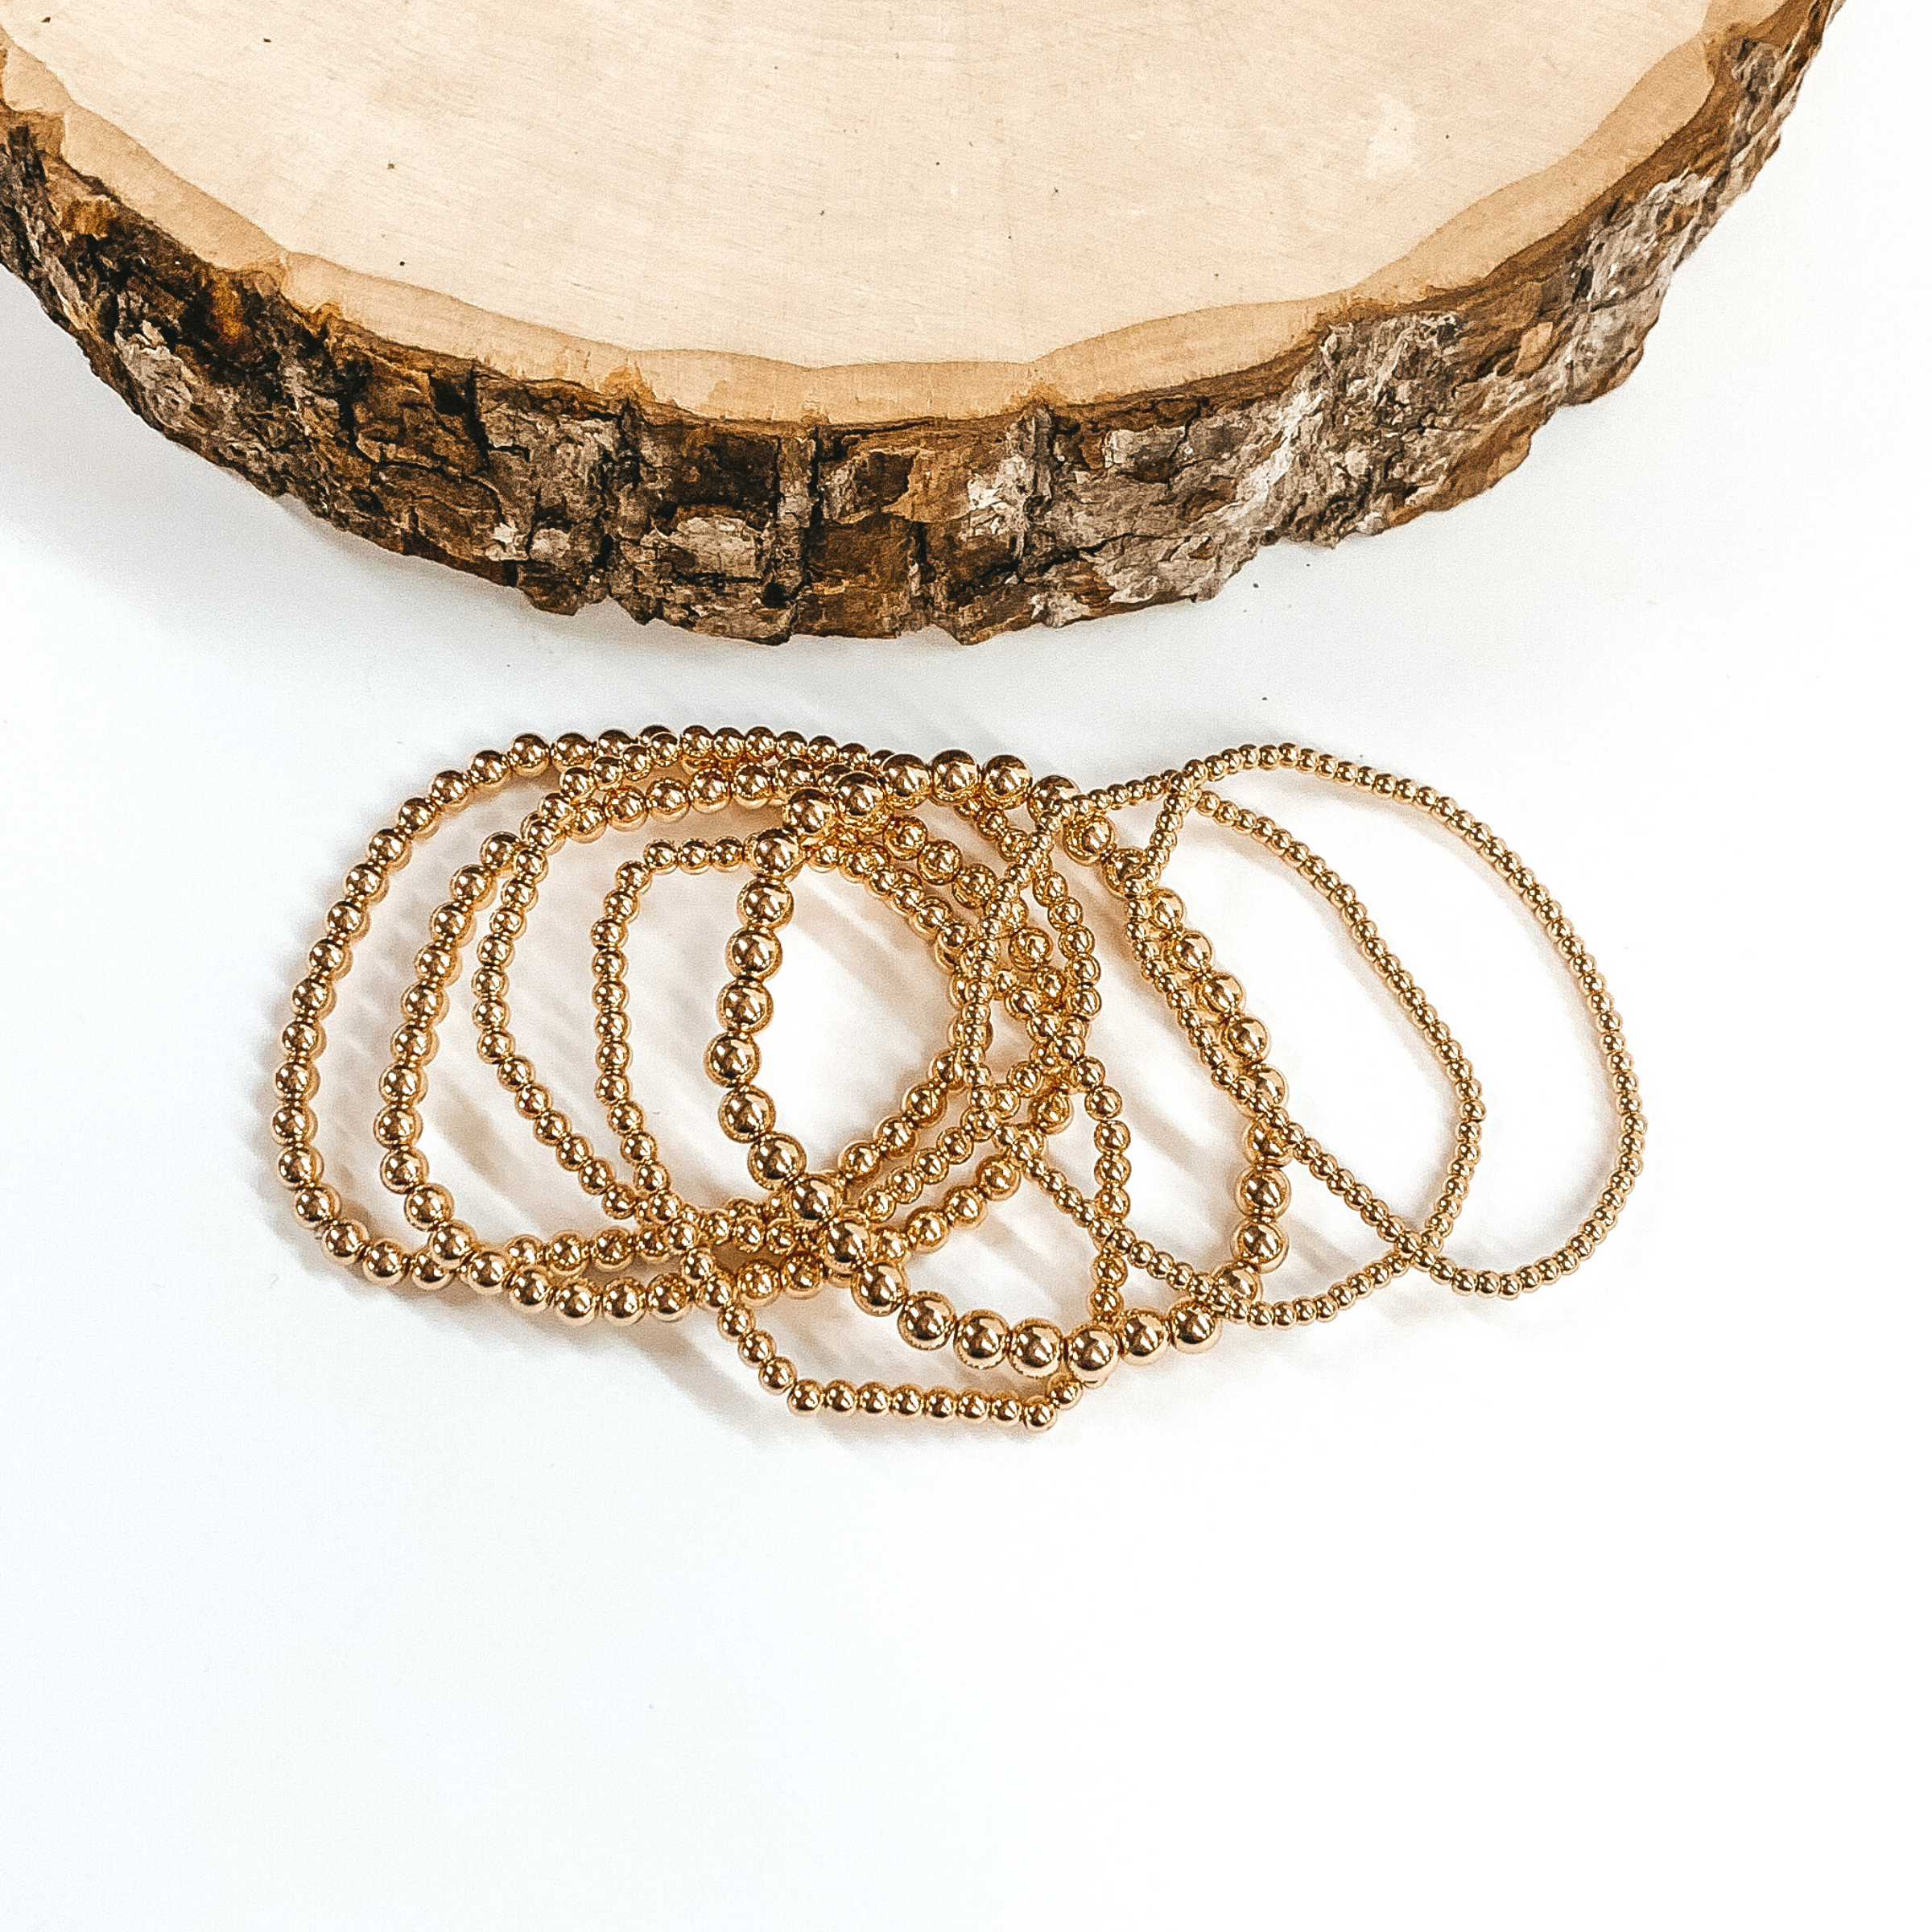 A set of seven gold beaded bracelets ranging in different size beads. These bracelets are laying on top of each other in front of a piece of wood on a white background. 